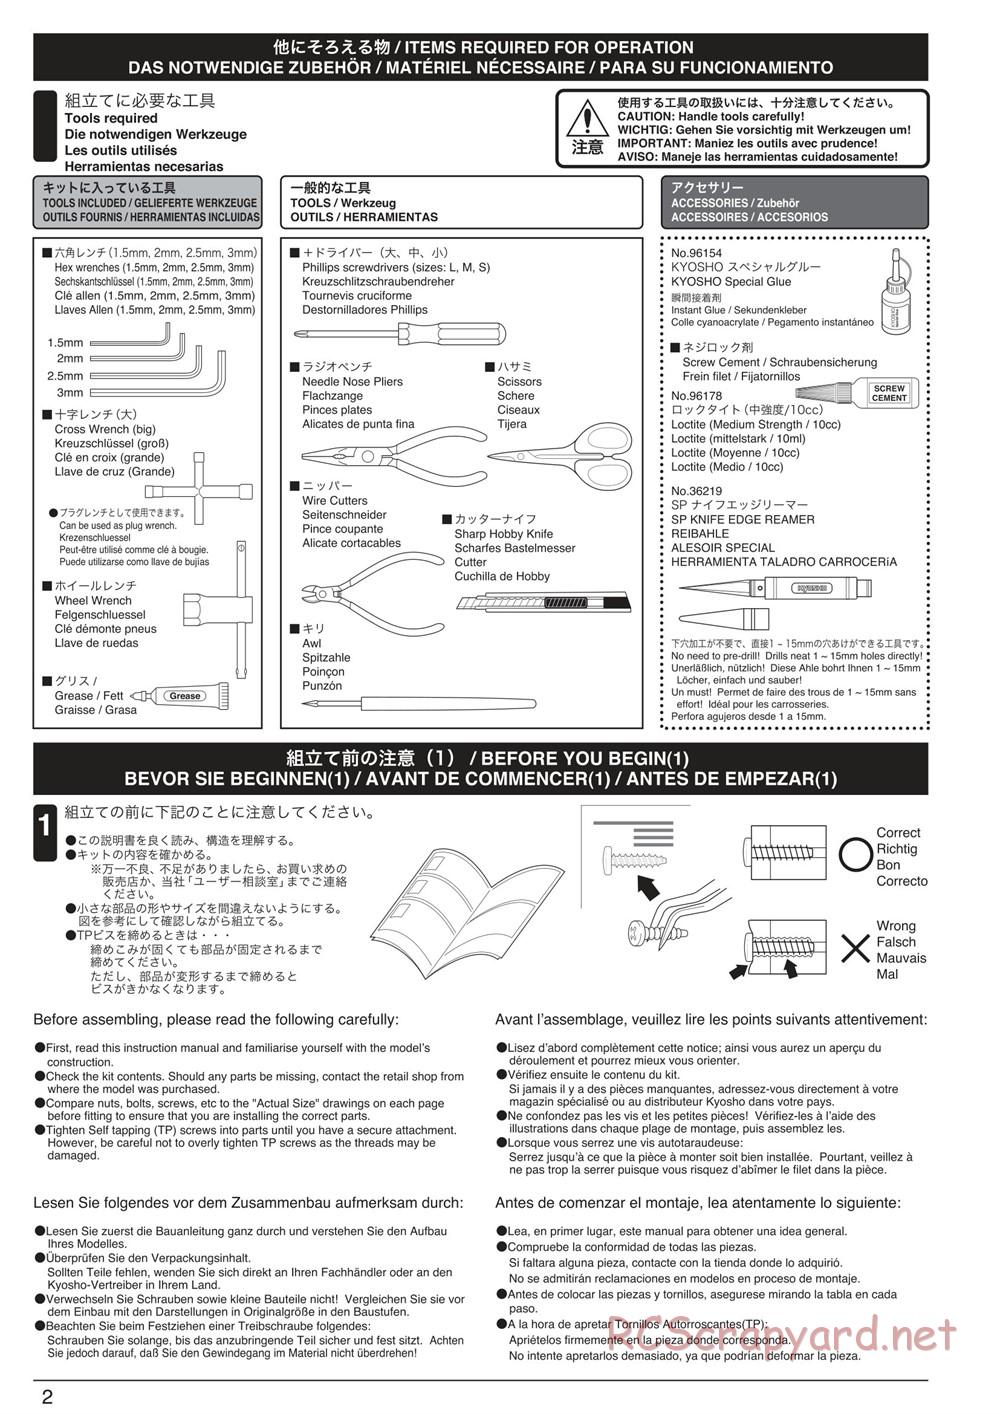 Kyosho - Mad Crusher - Manual - Page 2